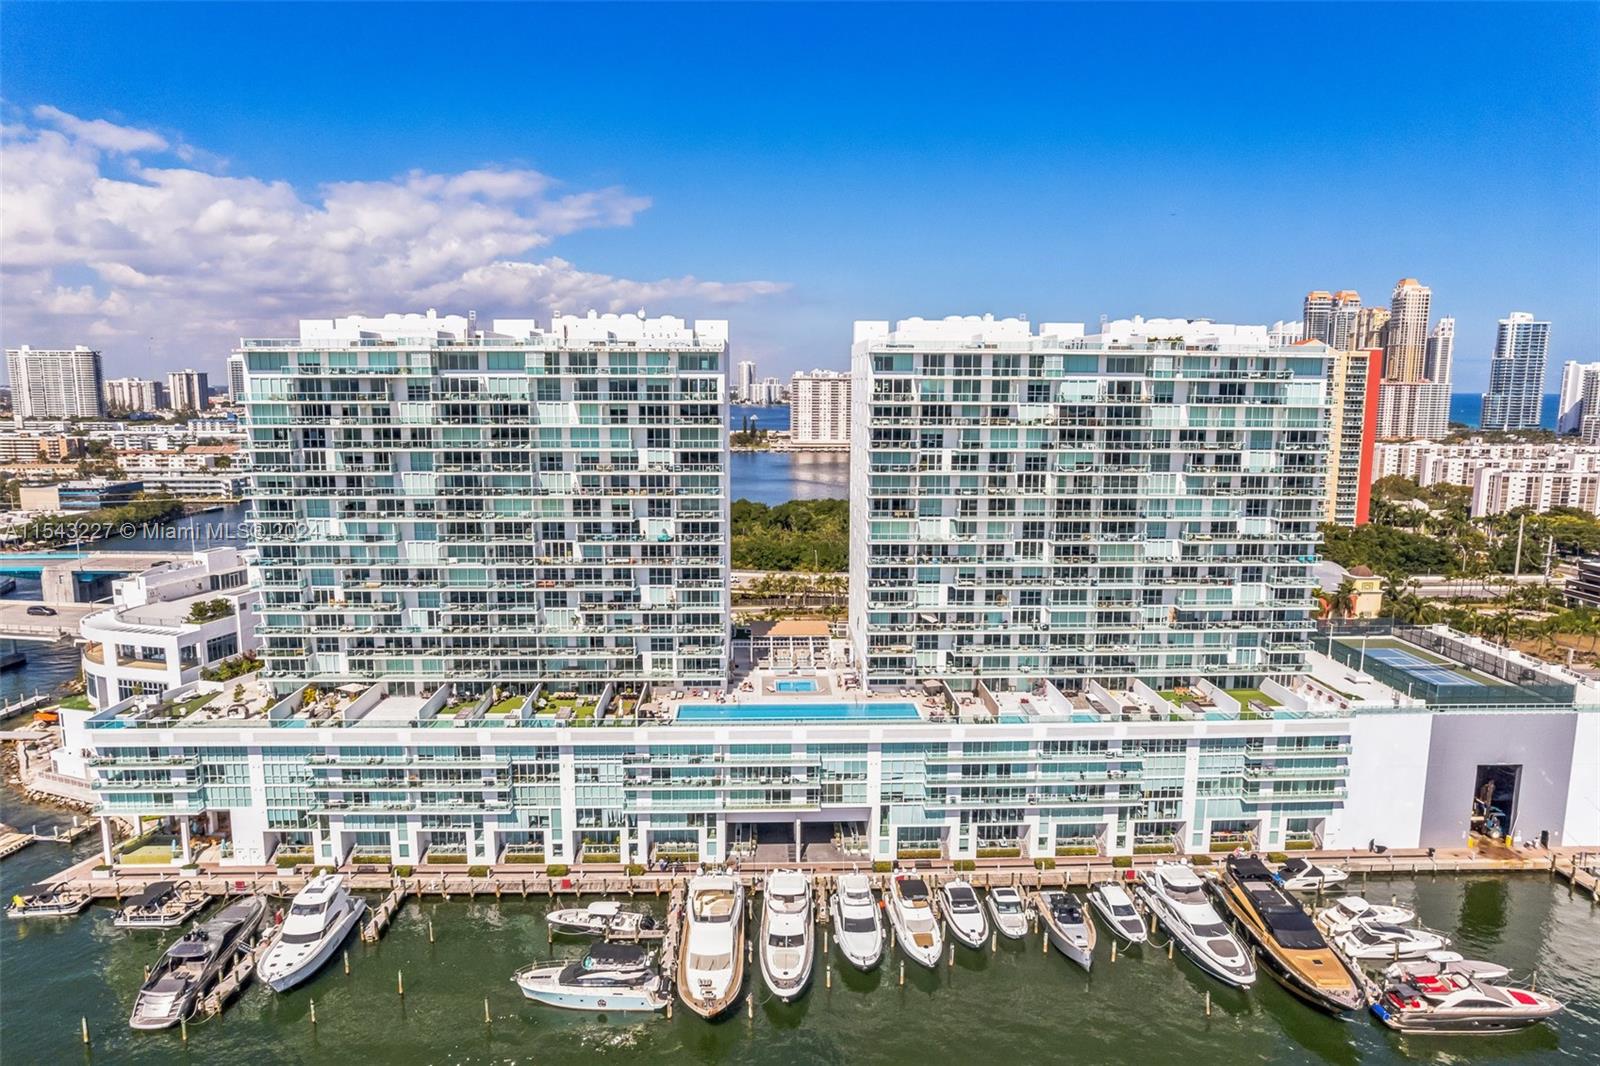 Indulge in the epitome of waterfront living with this stunning 2 Bed + Den | 3 Bath two-story unit in the coveted 400 Sunny Isles community. Perched majestically along the Intracoastal Waterway, this residence offers unparalleled views and upscale amenities. The open-concept layout is bathed in natural light, showcasing sleek modern finishes and panoramic vistas. The chef's kitchen features premium appliances. The secondary bedroom also boasts its own ensuite bathroom, ensuring privacy and comfort for guests or family members. Step outside to enjoy resort-style amenities including a pool, spa, and private marina. With beaches, dining, and shopping nearby, this is the ultimate Miami lifestyle. Schedule your viewing today!